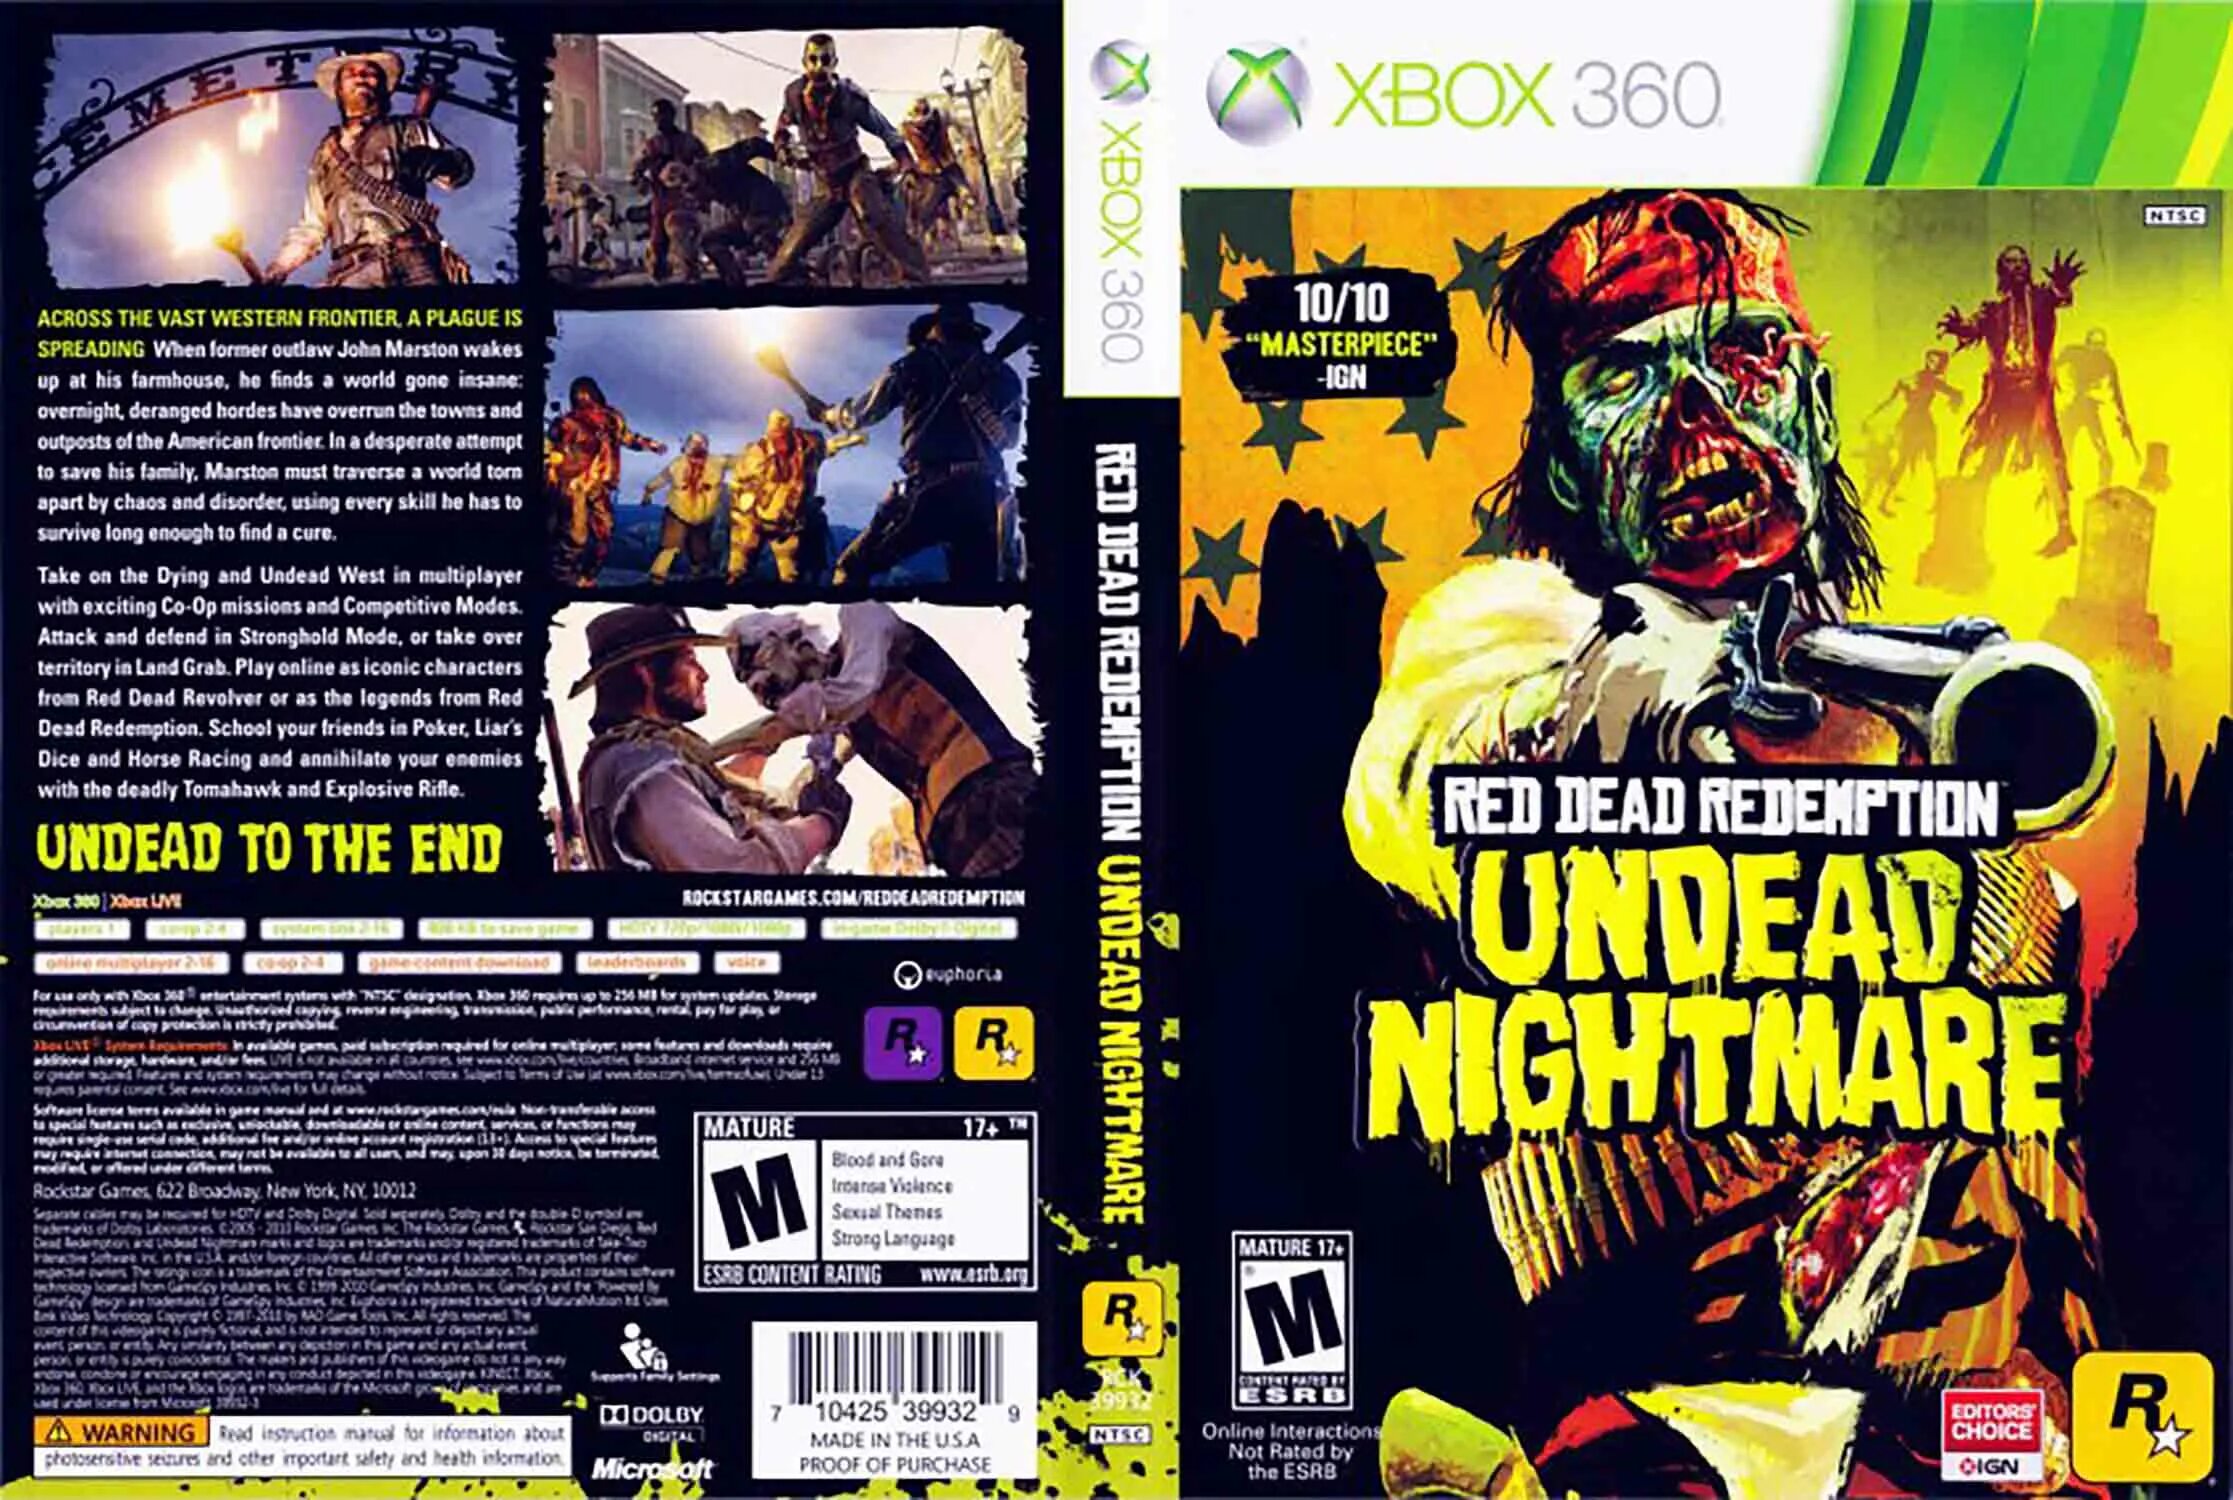 Red Dead Redemption диск Xbox 360. Rdr Xbox 360 обложка. Red Dead Redemption Undead Nightmare Xbox 360 обложка. Undead Nightmare Xbox 360.